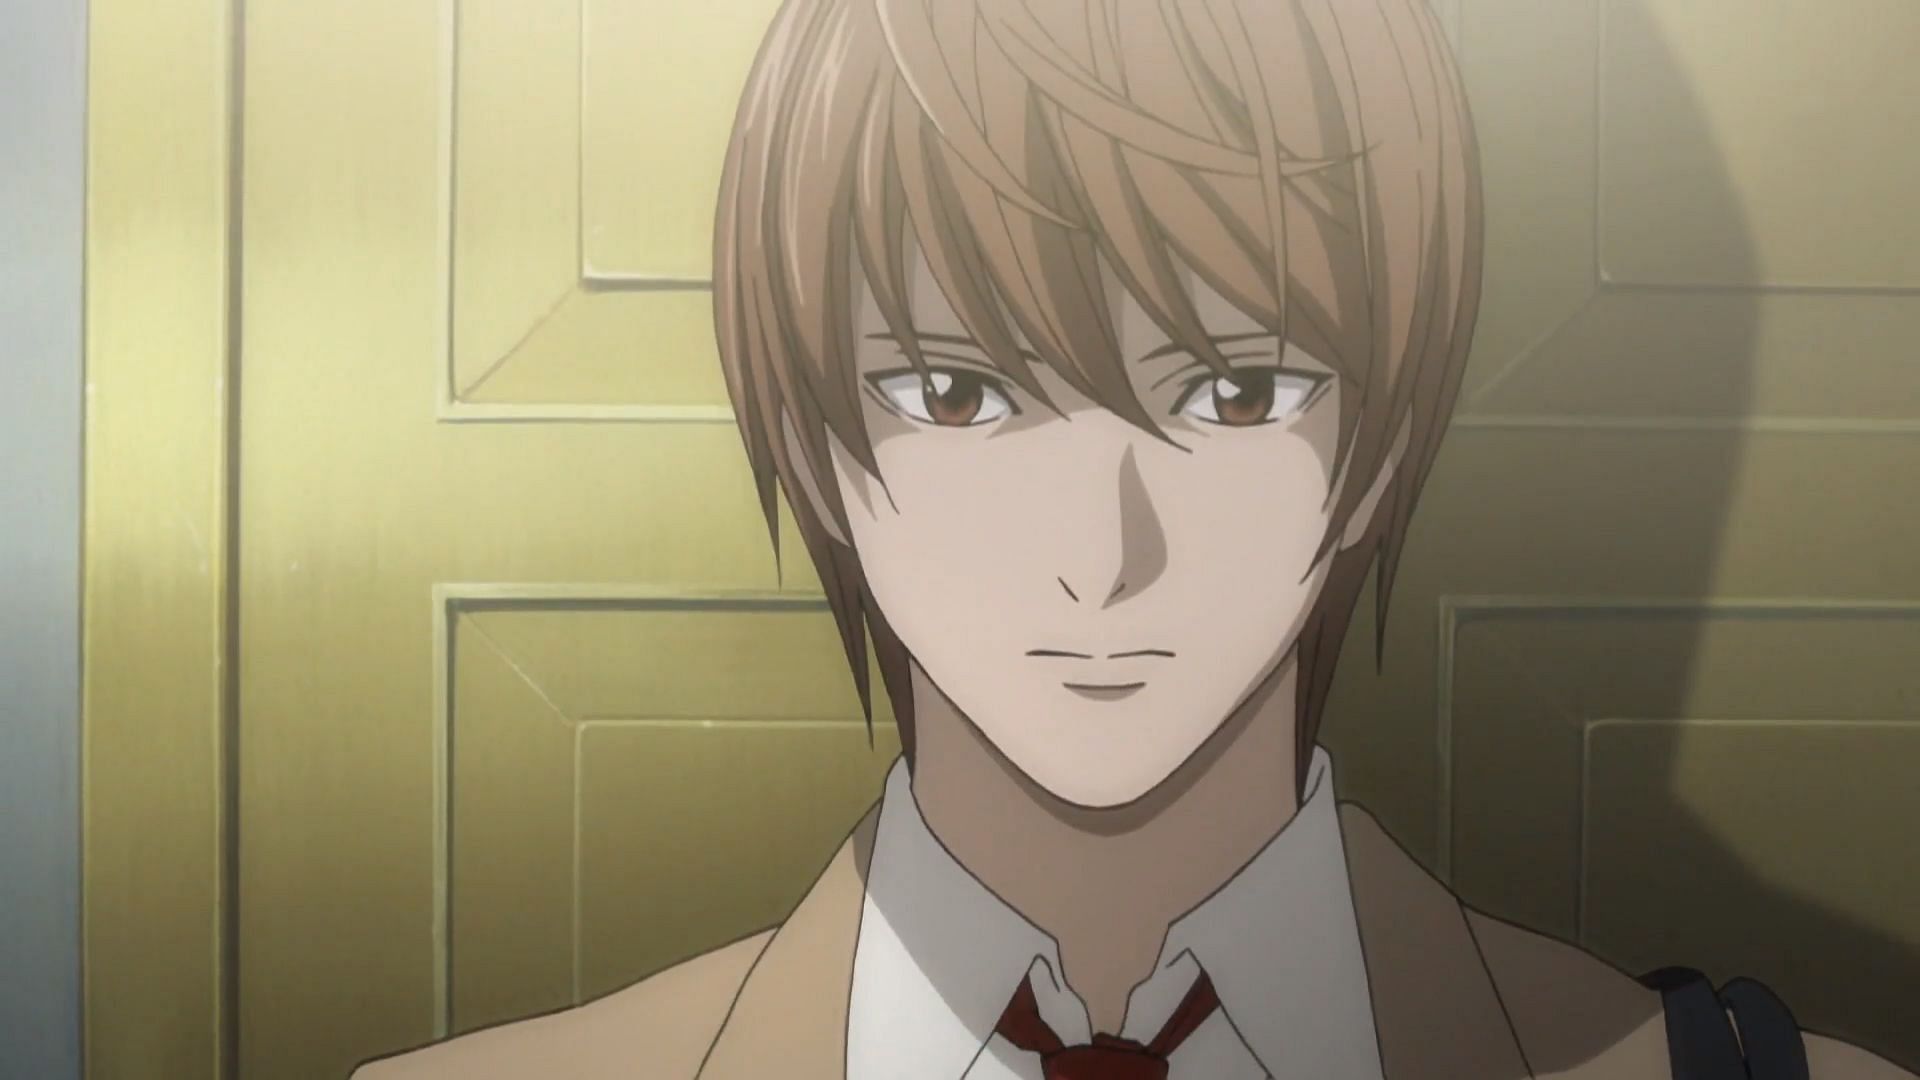 Light Yagami as seen in anime Death Note - Image via Studio Madhouse